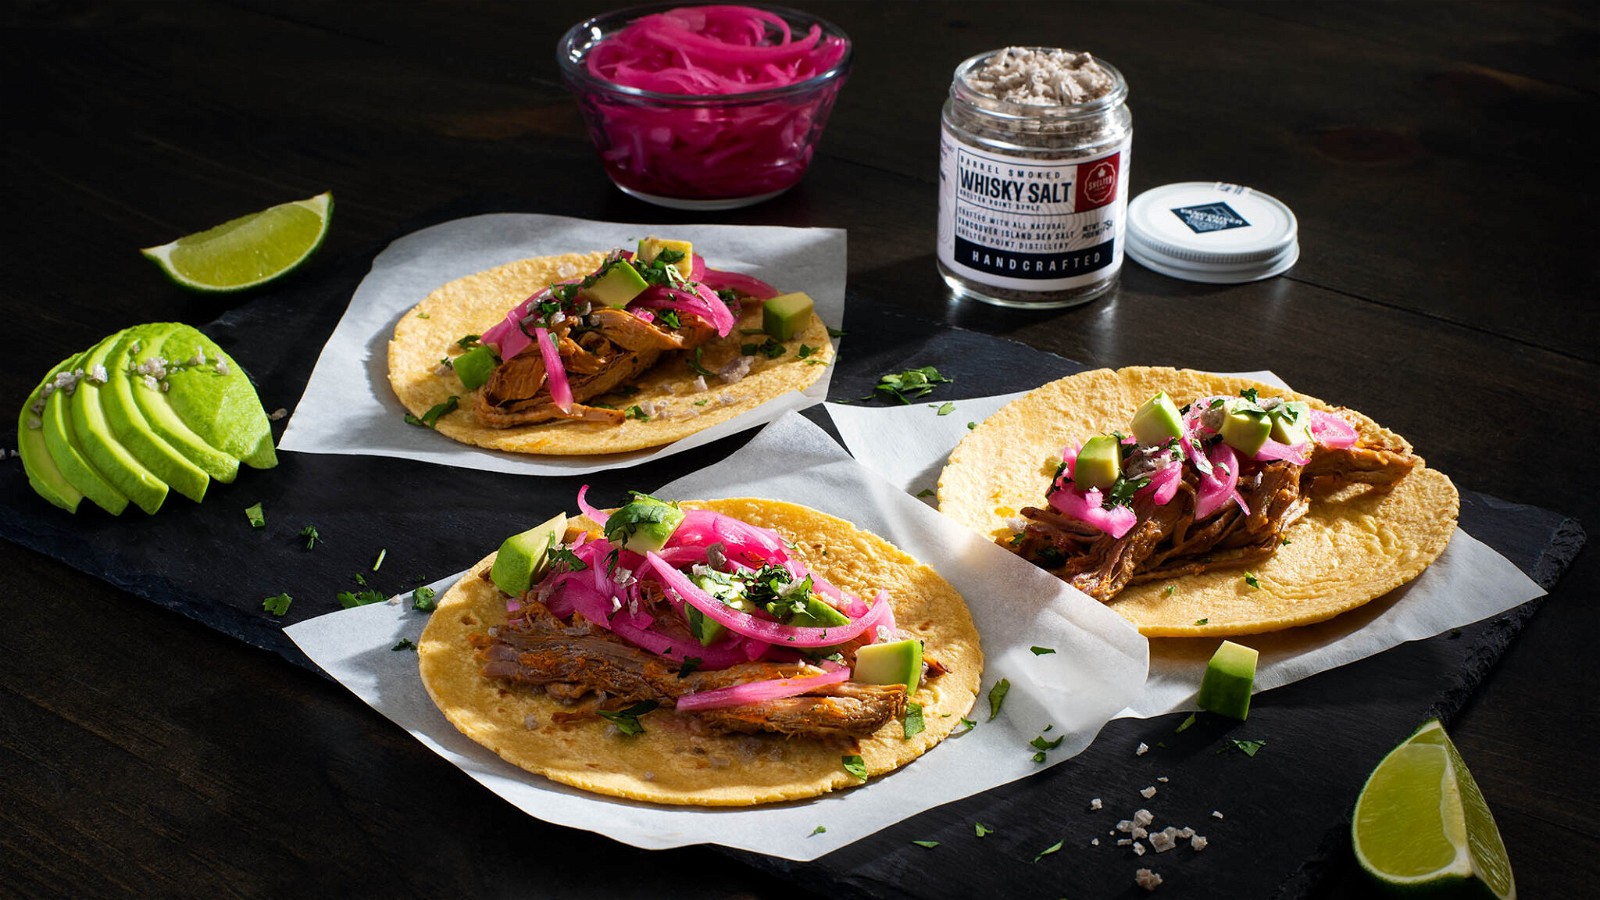 Image of Pulled Pork Carnitas with Pickled Onions